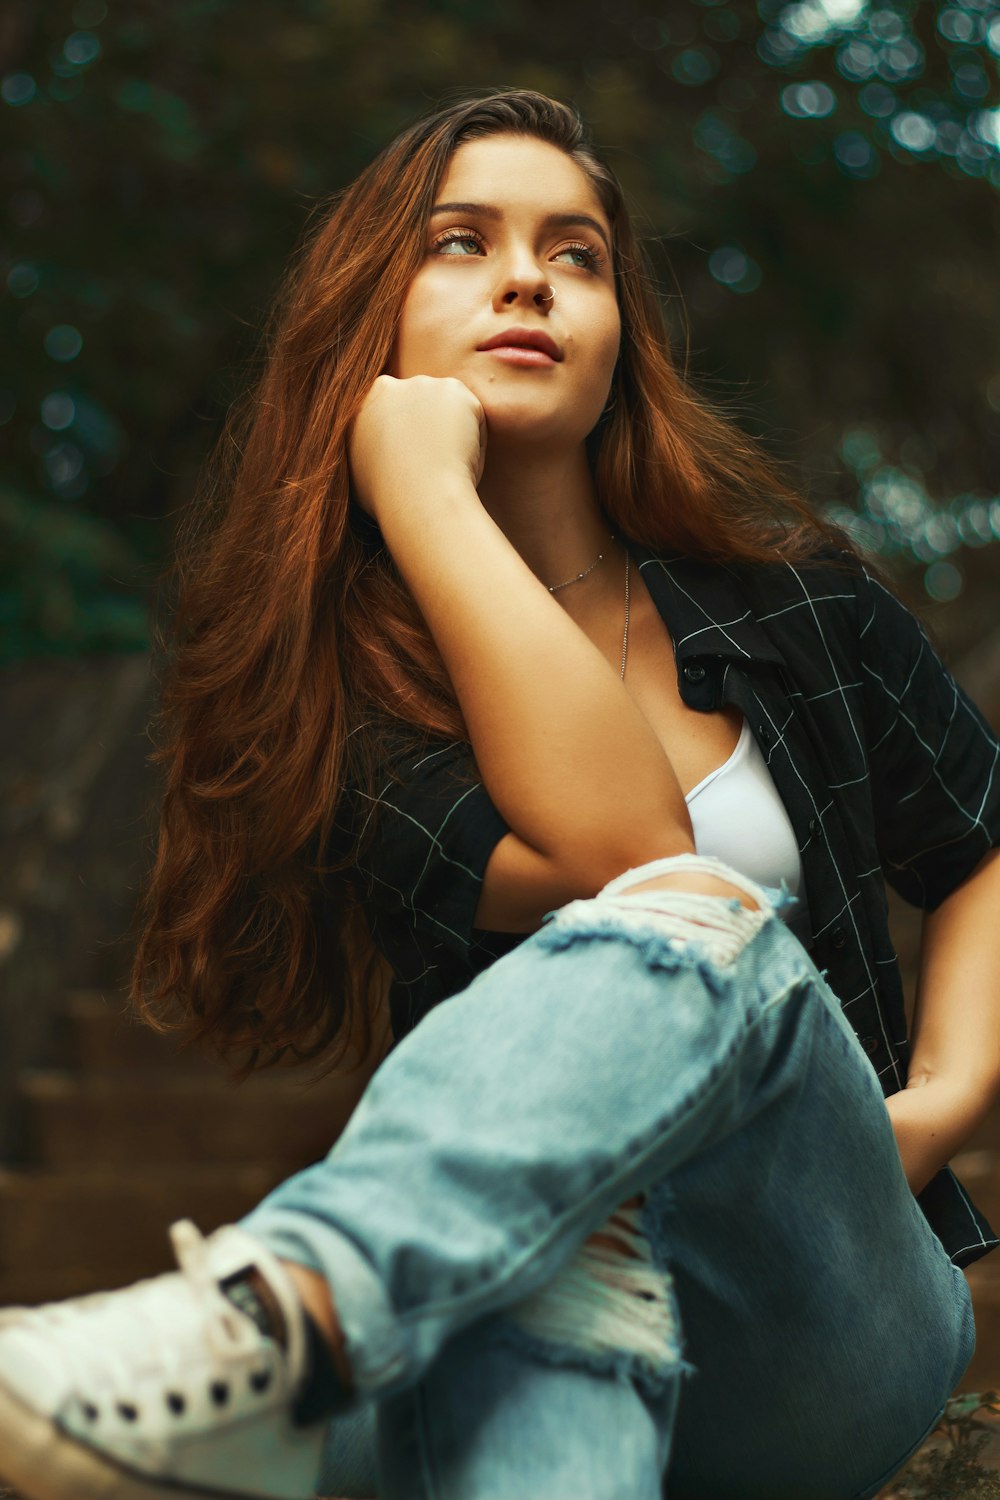 woman in black shirt and blue denim jeans sitting on brown wooden bench